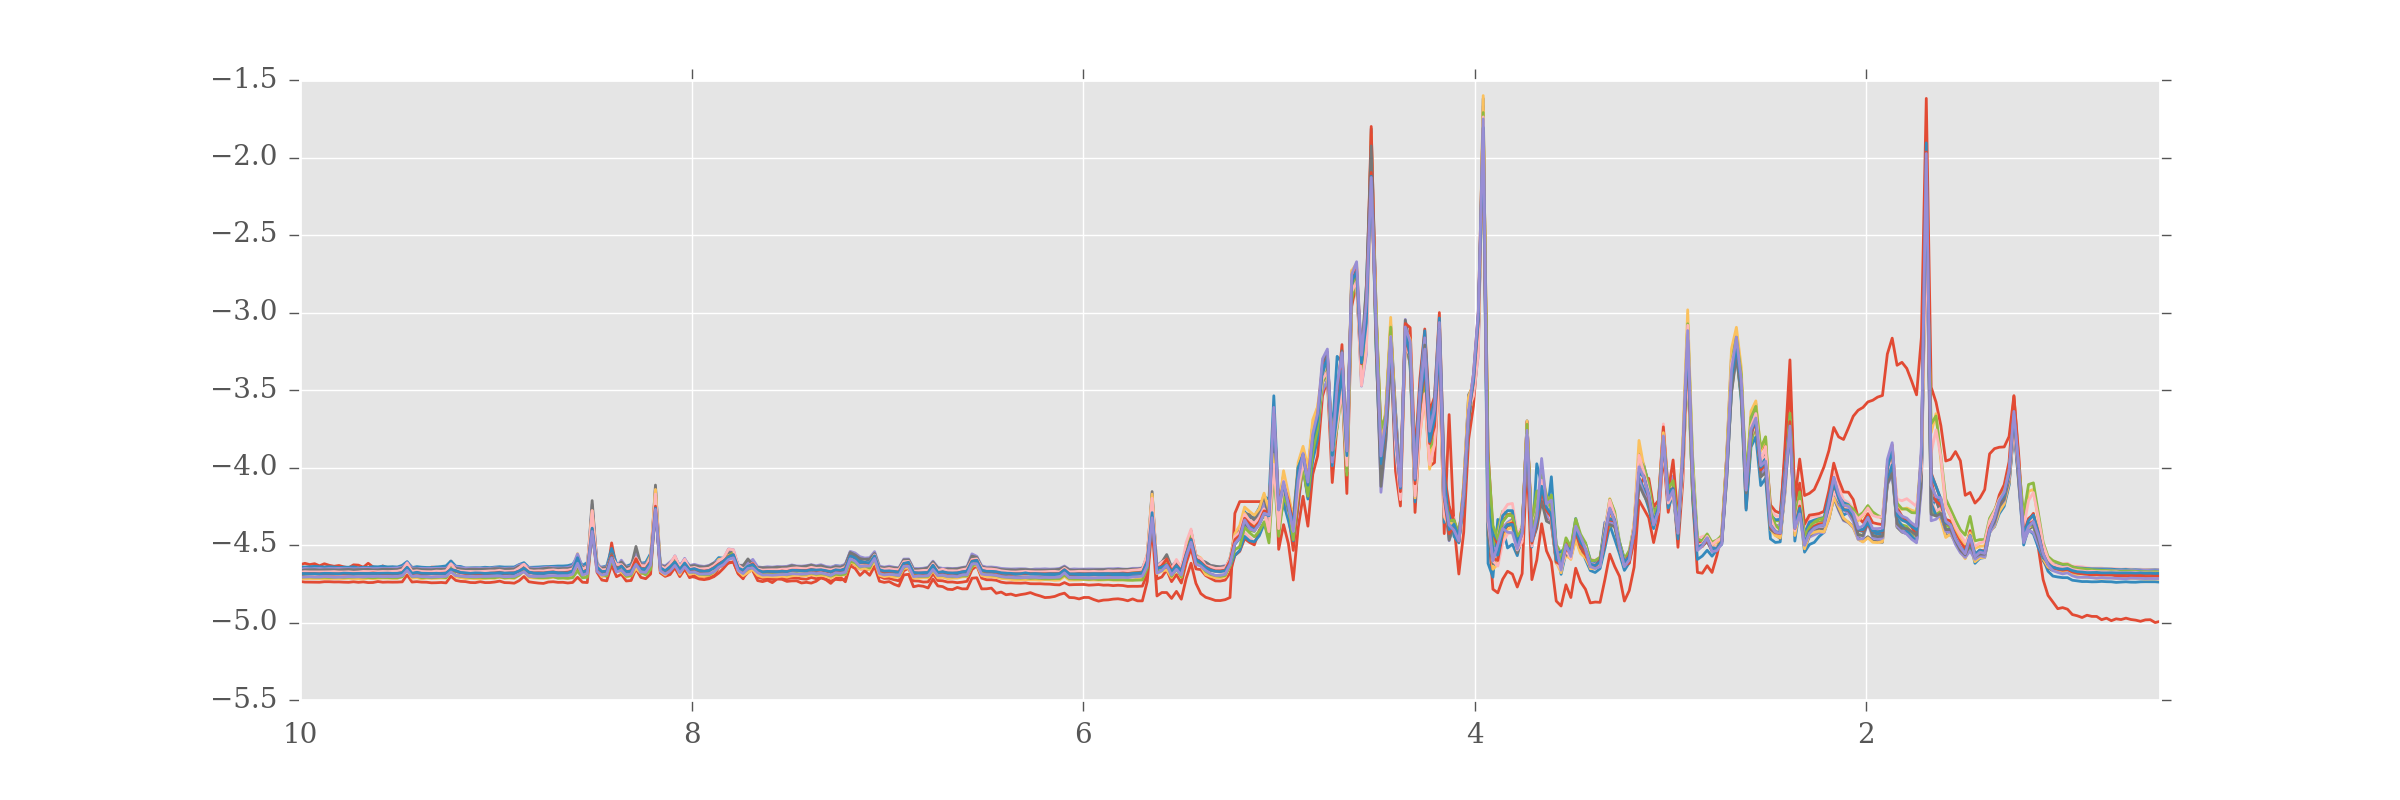 The processed NMR data for our analysis